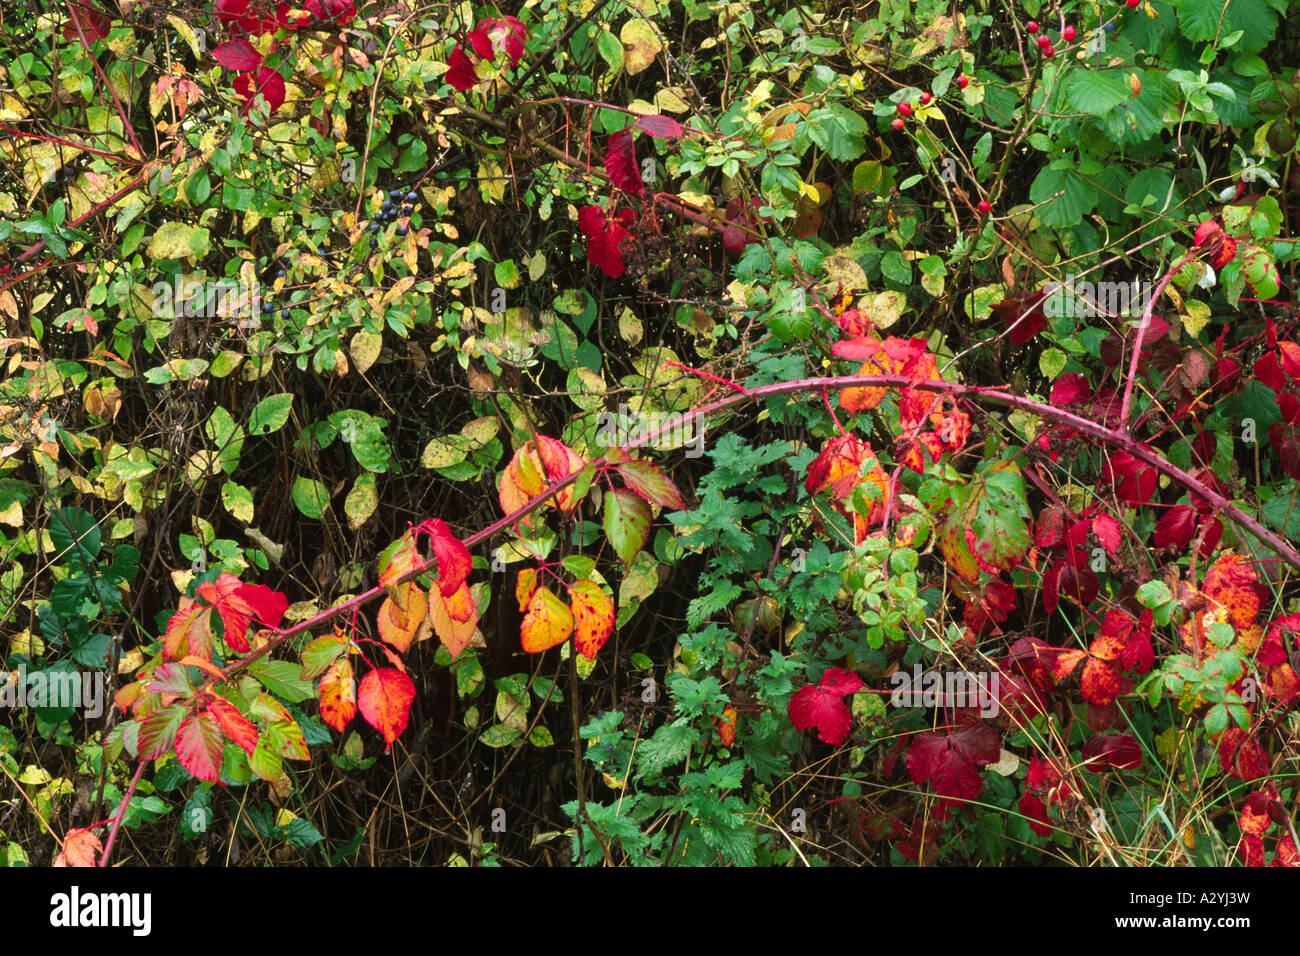 Hedge on an Organic Farm in Autumn. With Brambles, Blackthorn, Roses, etc, in Autumn. Powys, Wales, UK. Stock Photo